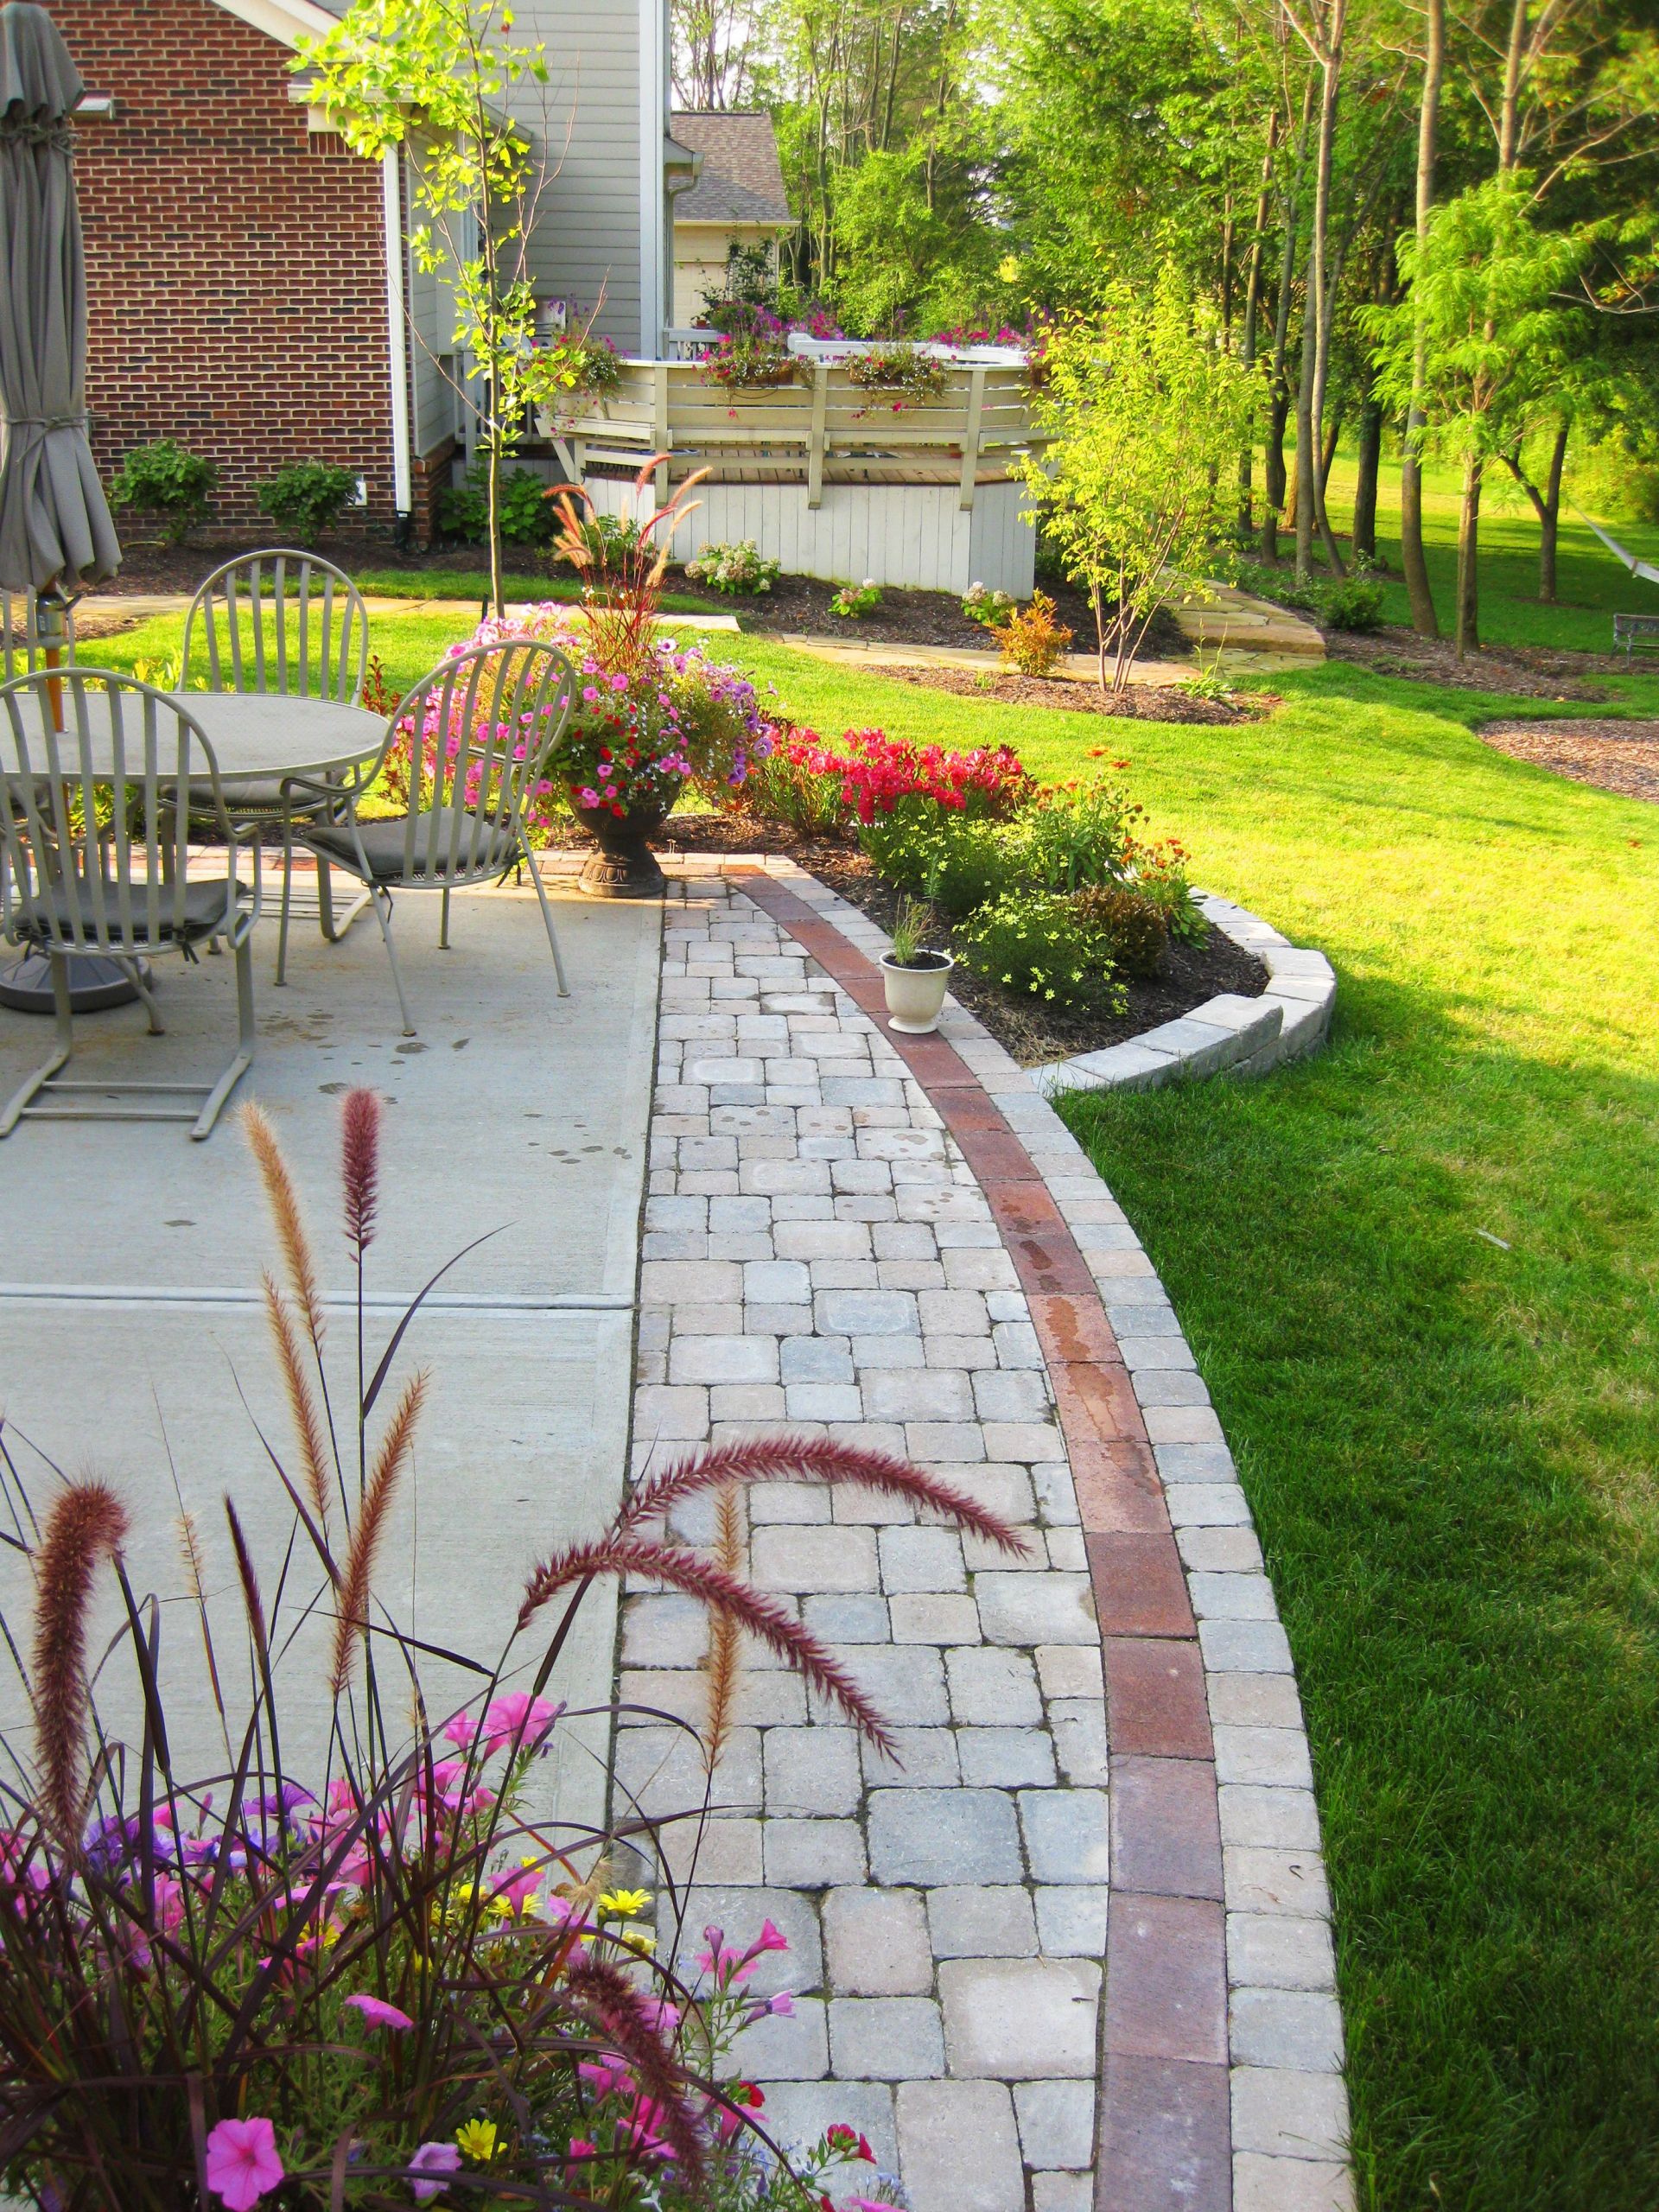 Landscaping Around Patio
 Stones and pavers to extend the patio Landscape